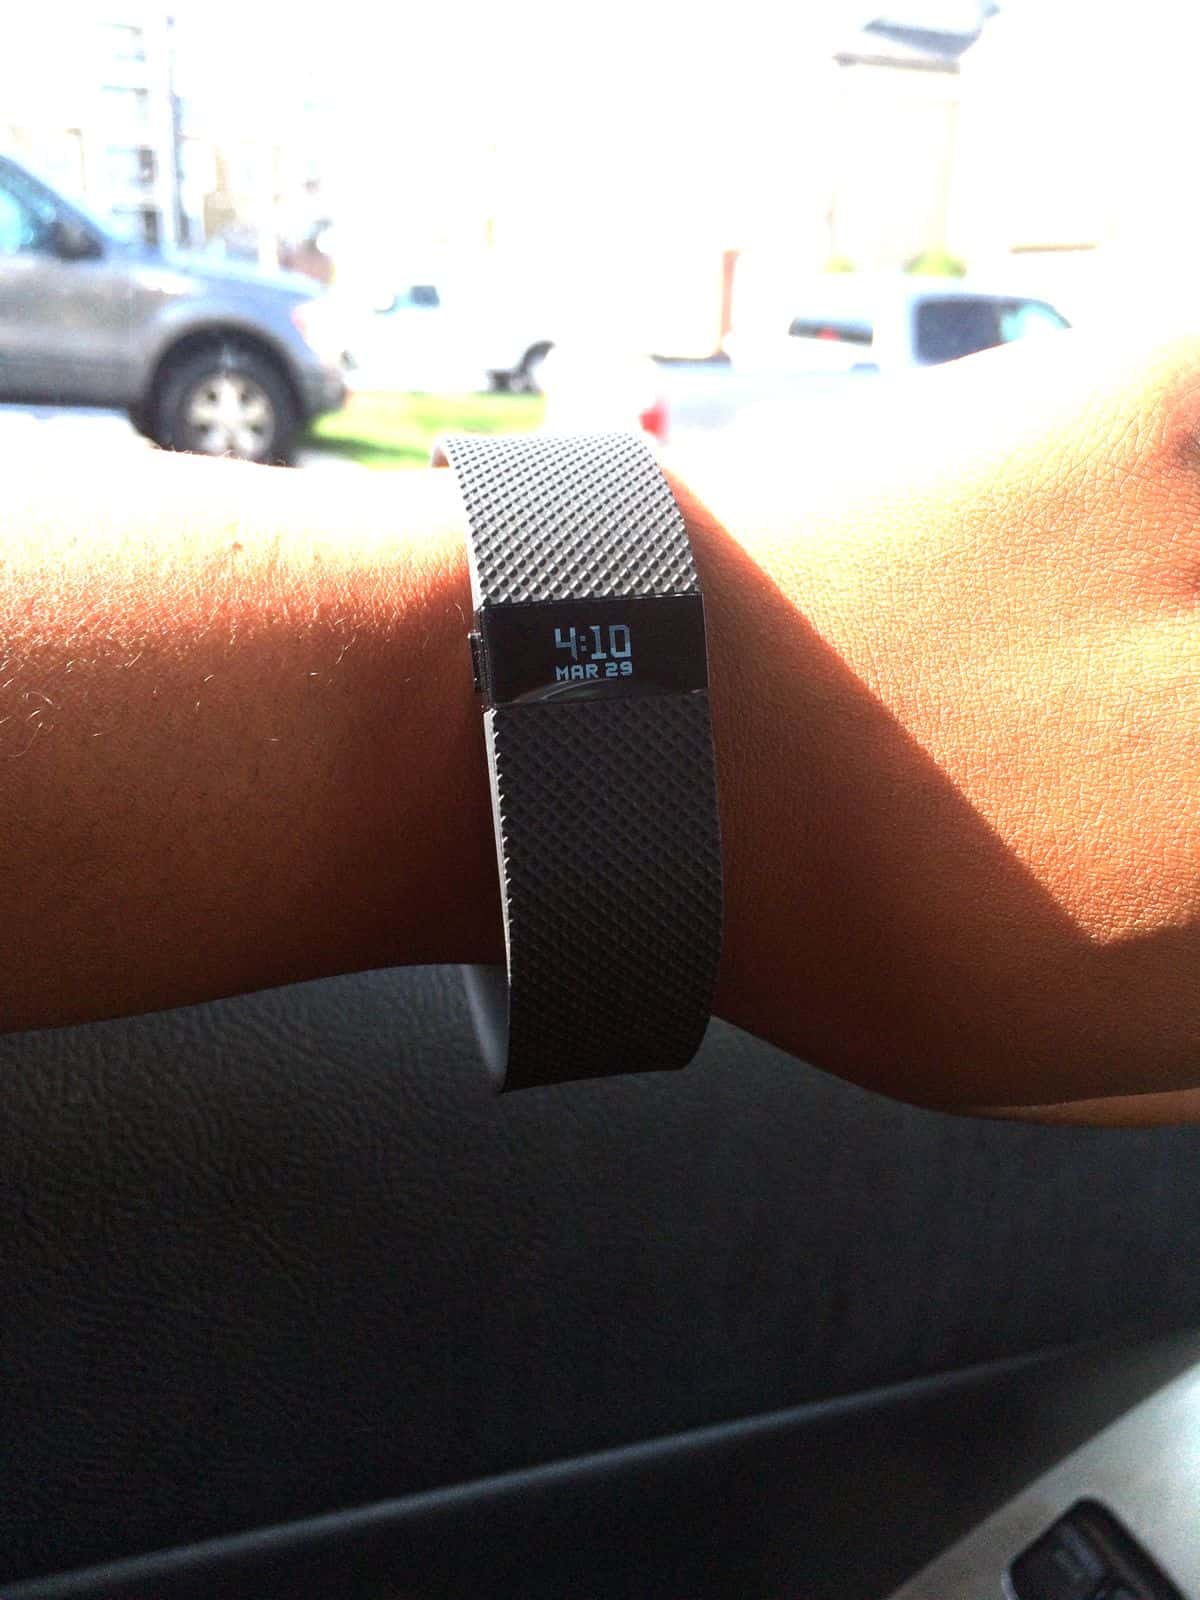 The FitBit shows that your wearable mobile UI design should reflect the body part wearing it. When jogging, users aren’t staring at their wrists.